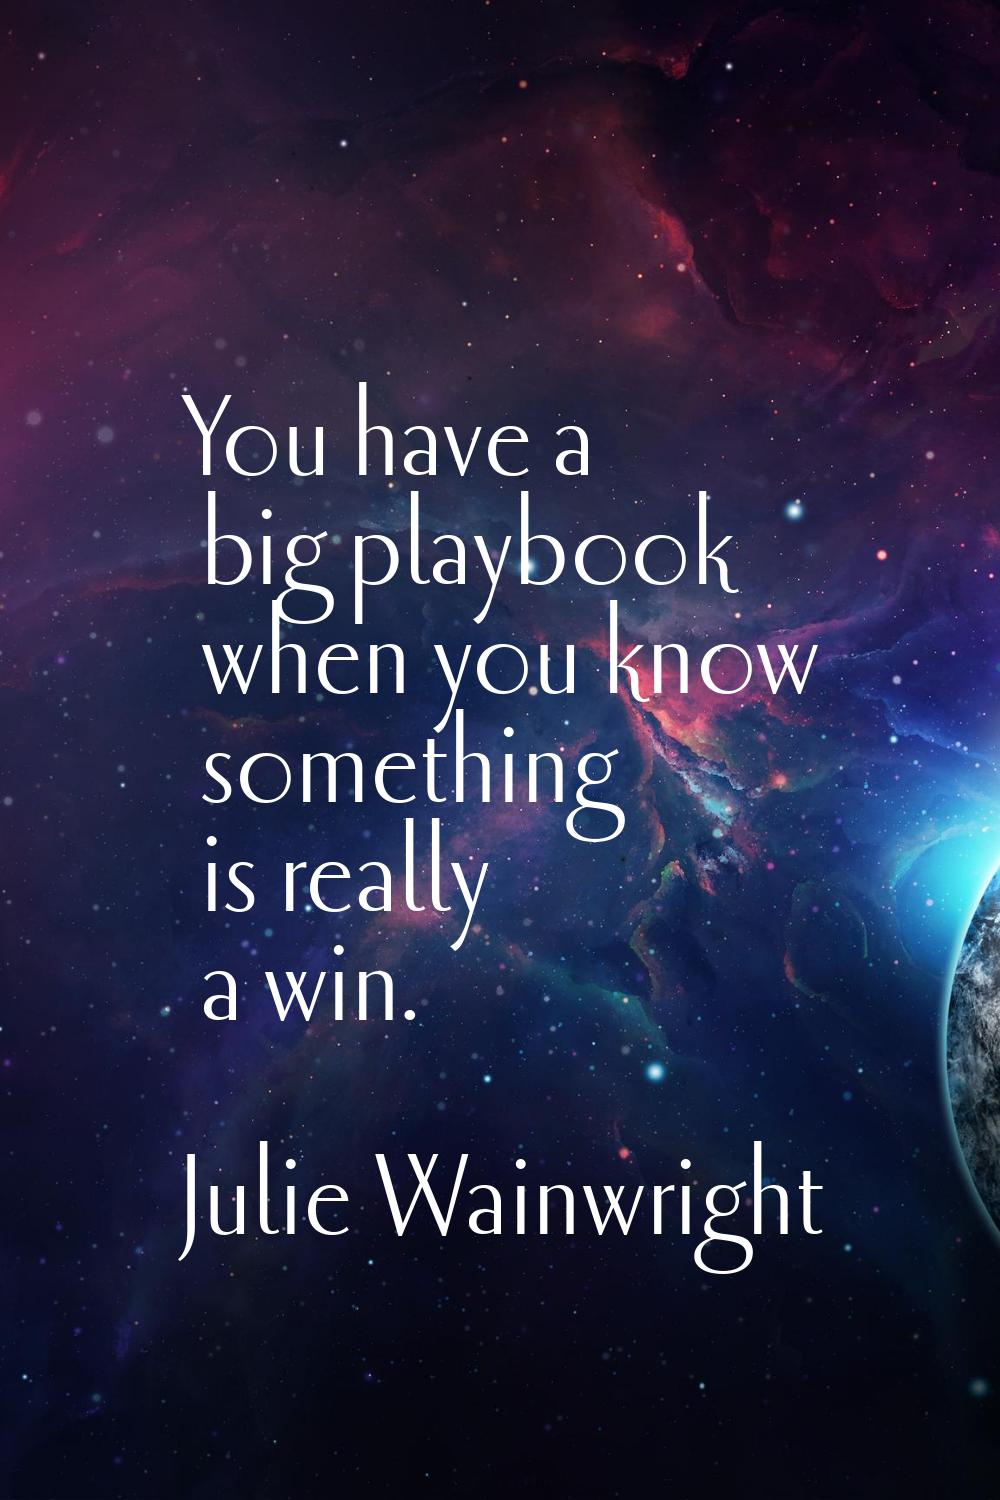 You have a big playbook when you know something is really a win.